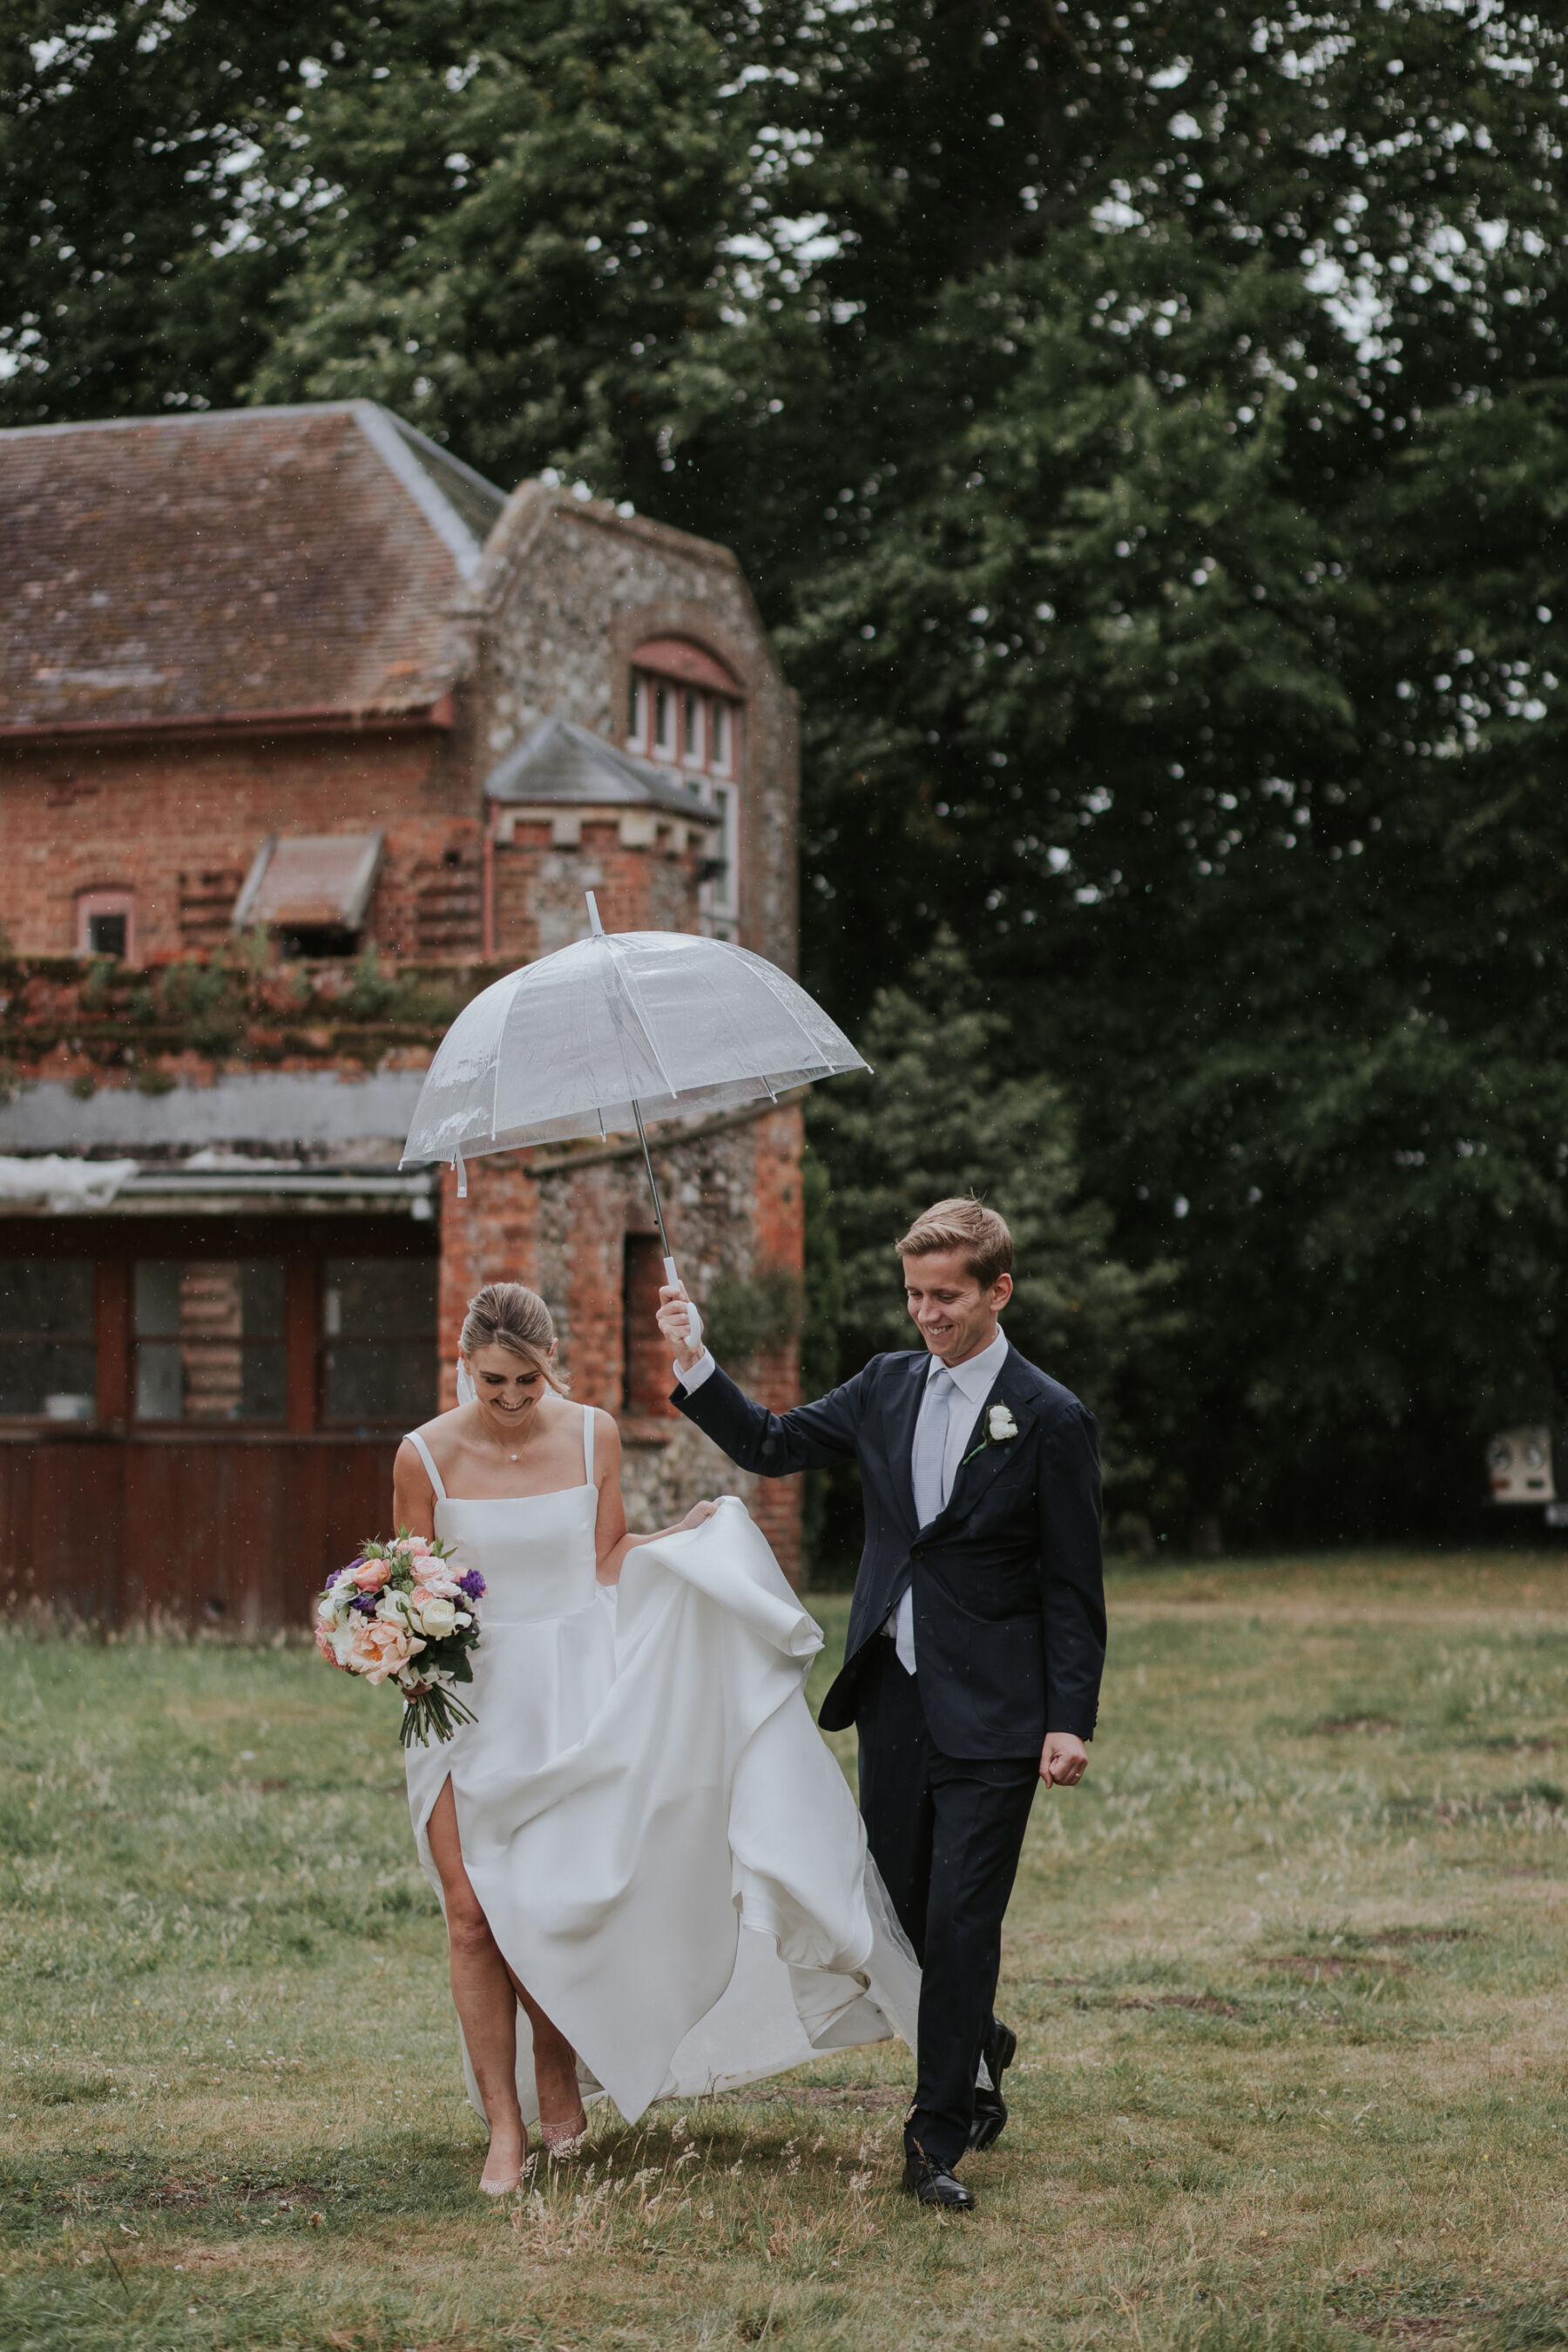 Groom holding a clear umbrella over his bride as they walk through the grass.